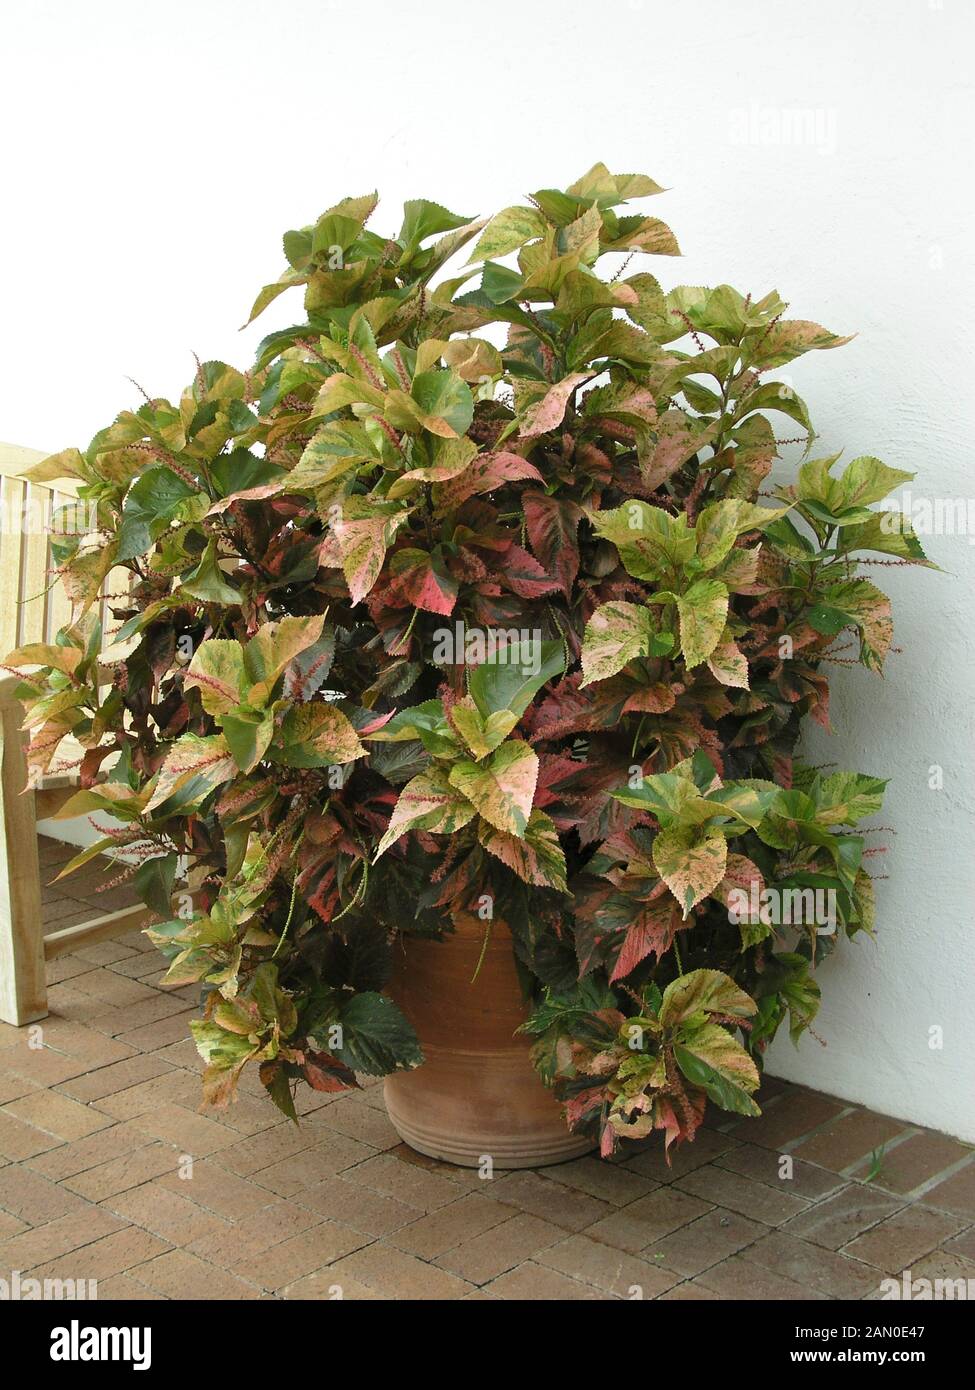 ACALYPHA WILKESIANA IN CONTAINER Stock Photo